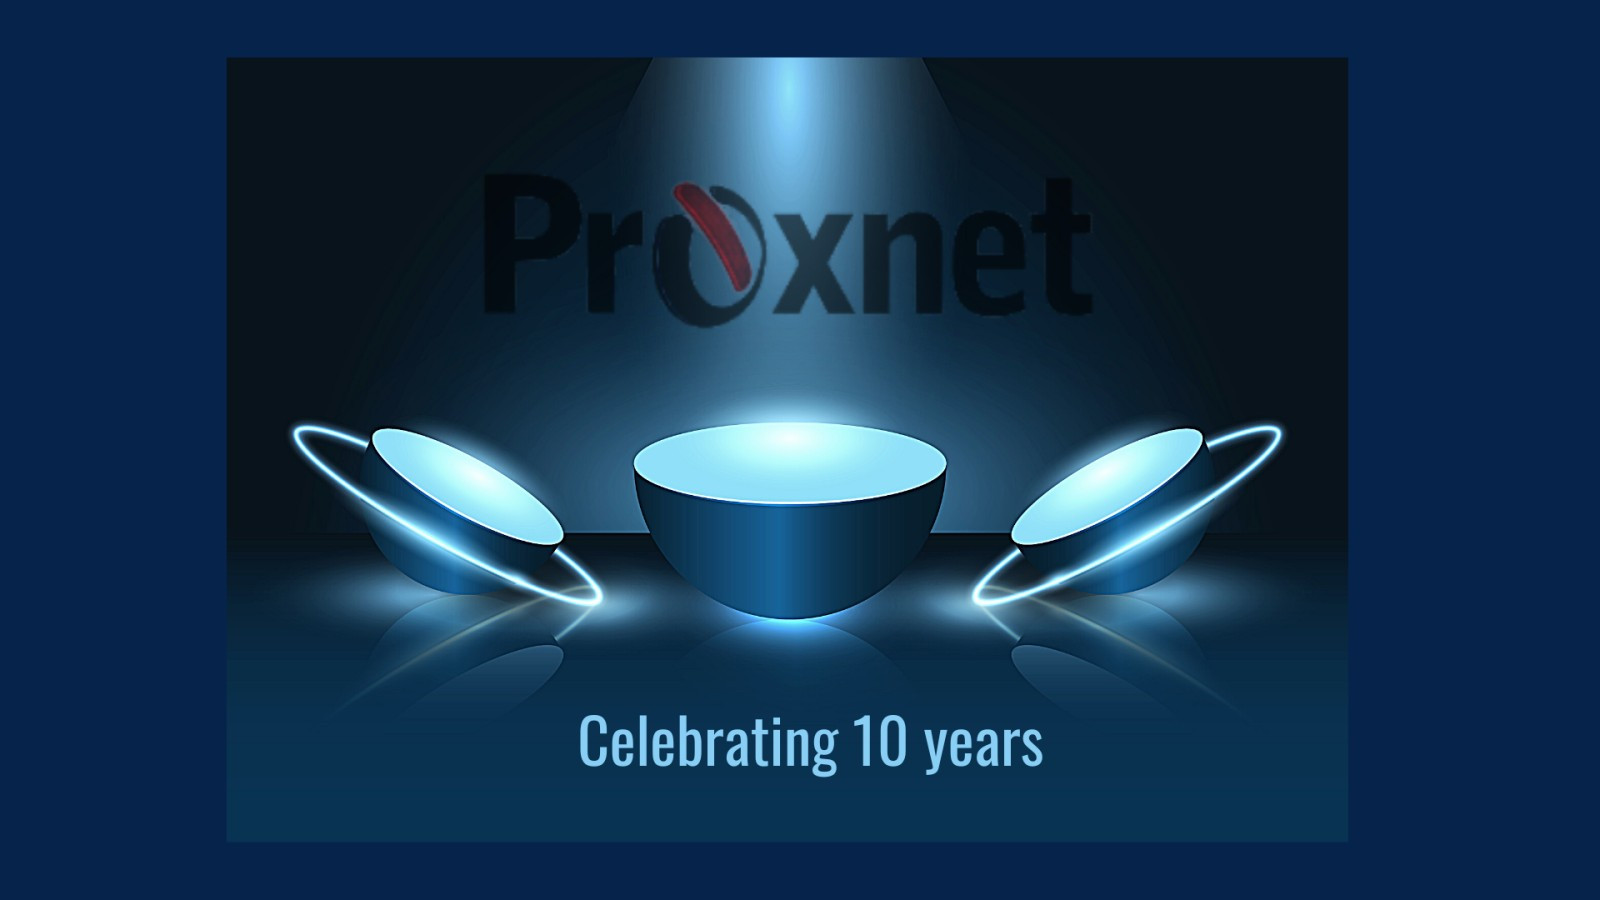 We are celebrating 10 years